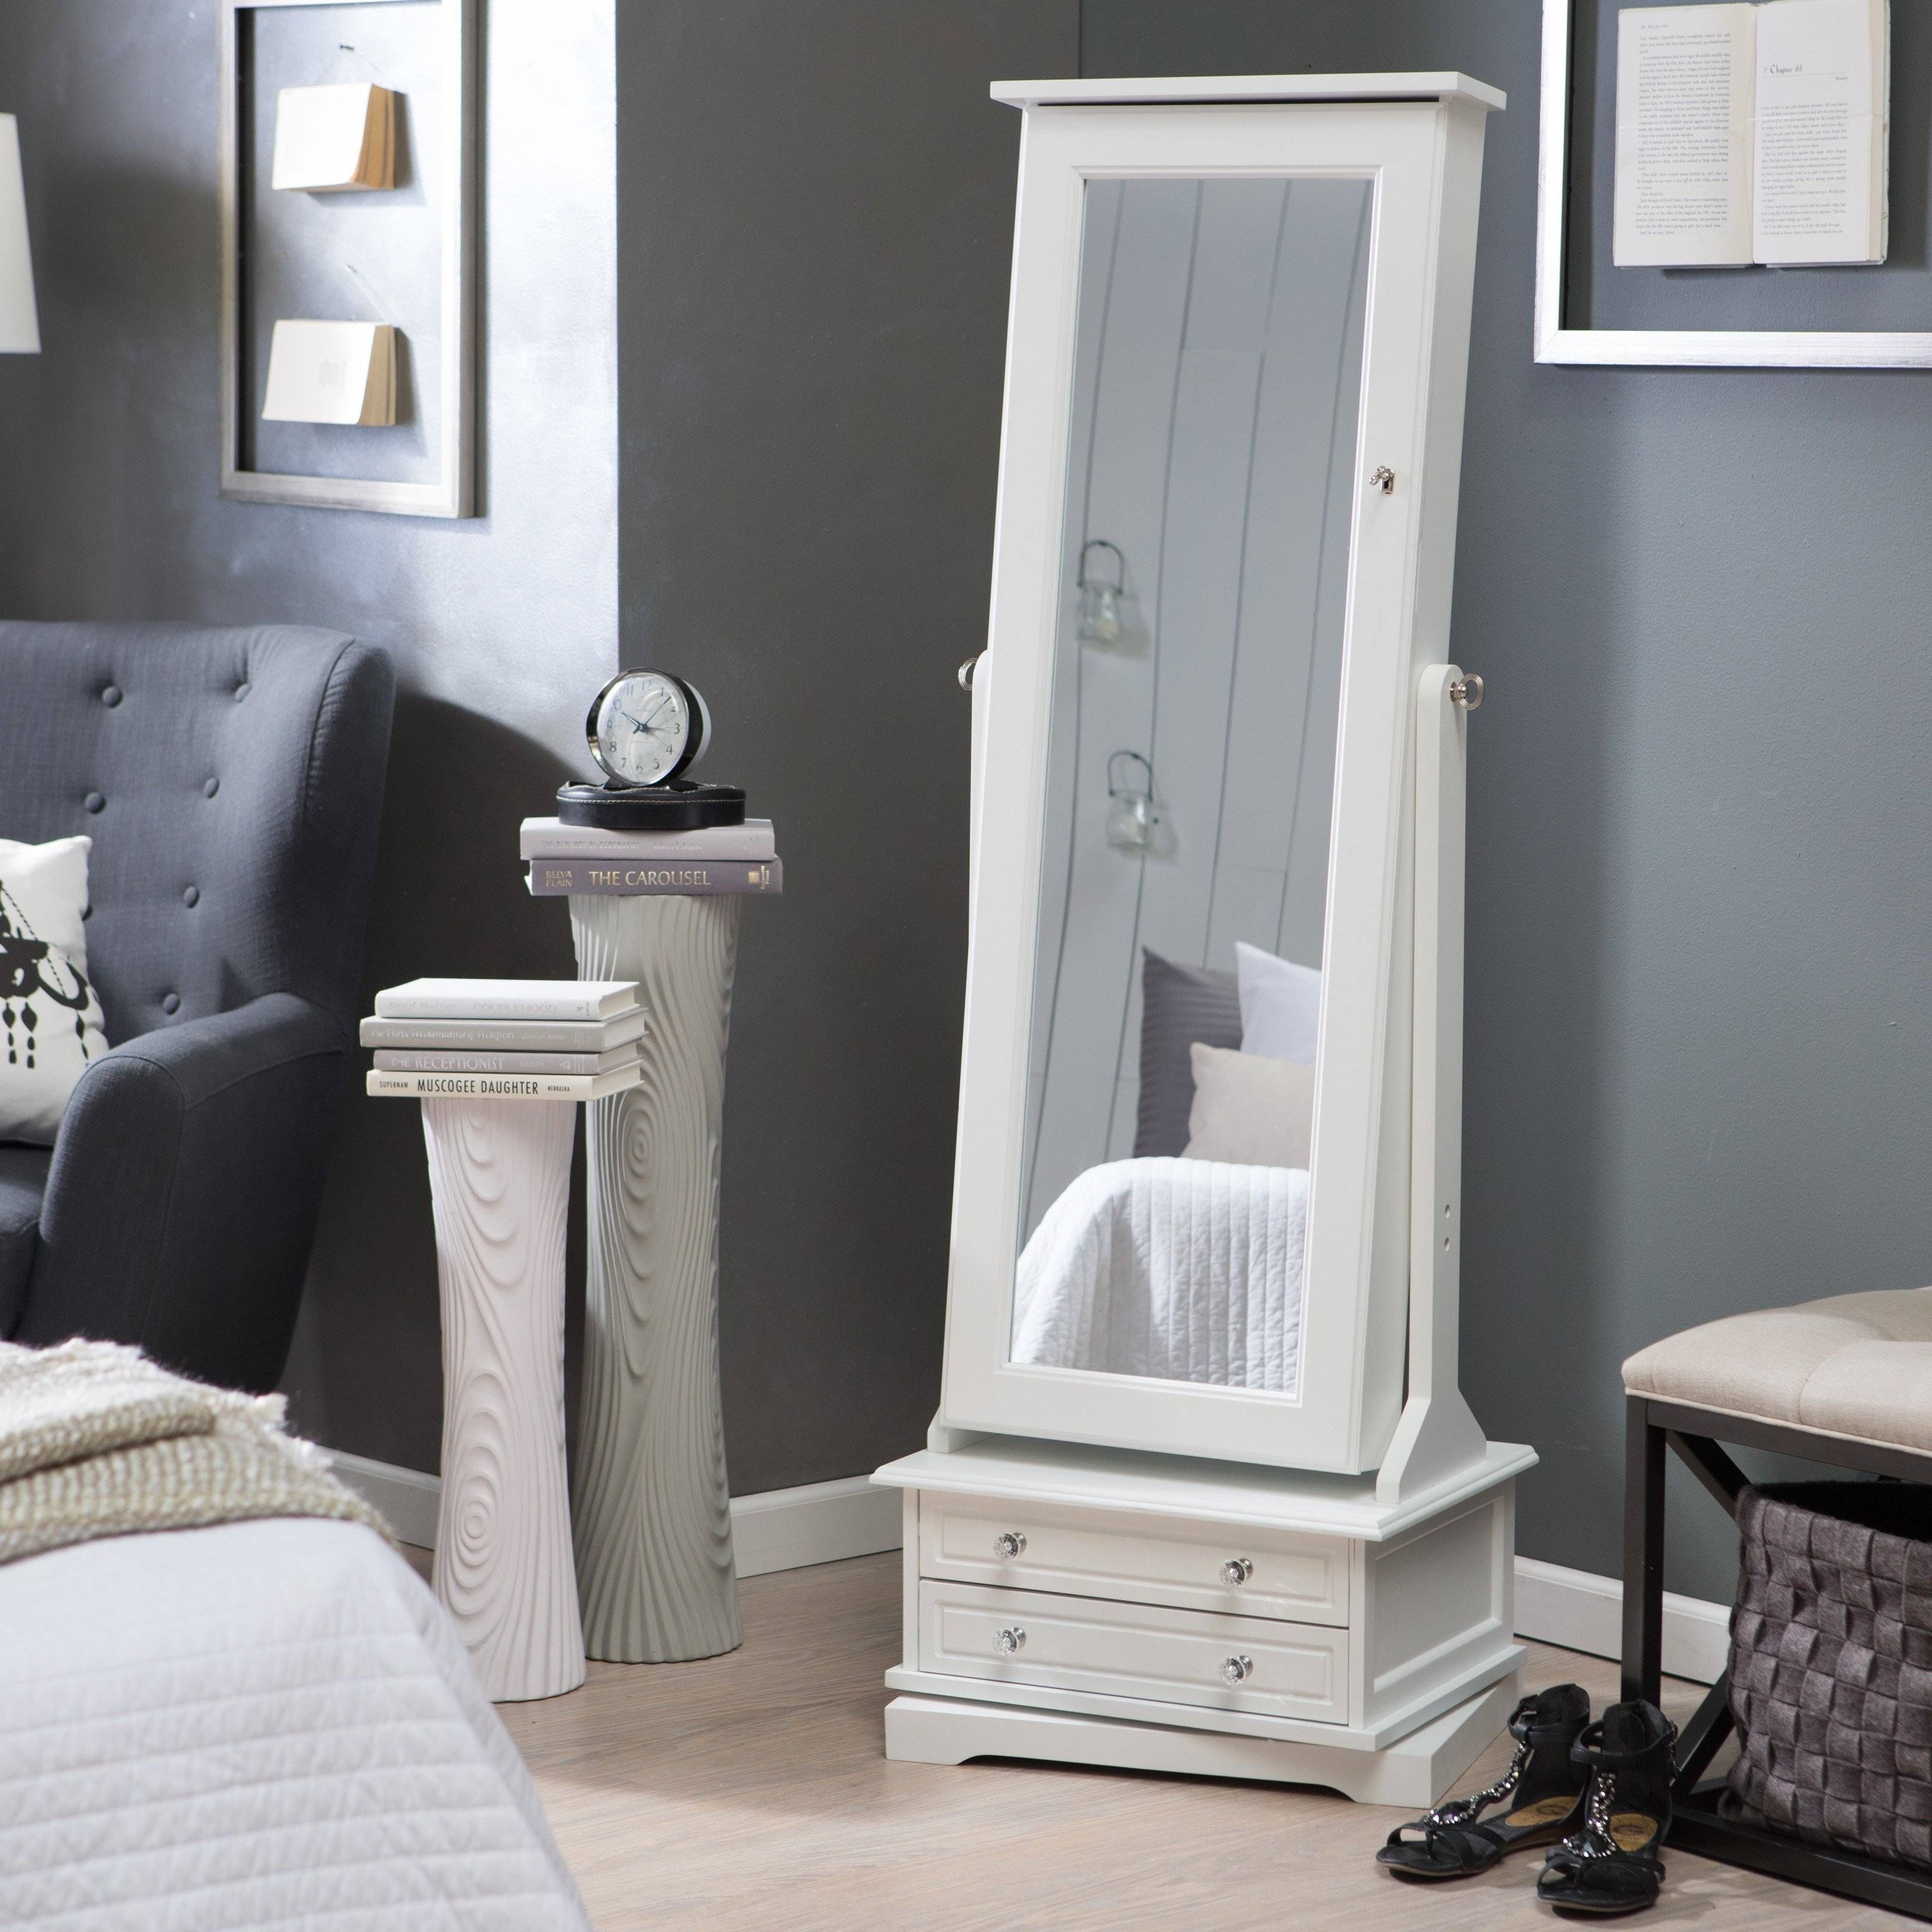 Bedroom Furniture Sets : Ceiling To Floor Large Decorative Mirrors With Large Floor Standing Mirrors (View 14 of 25)